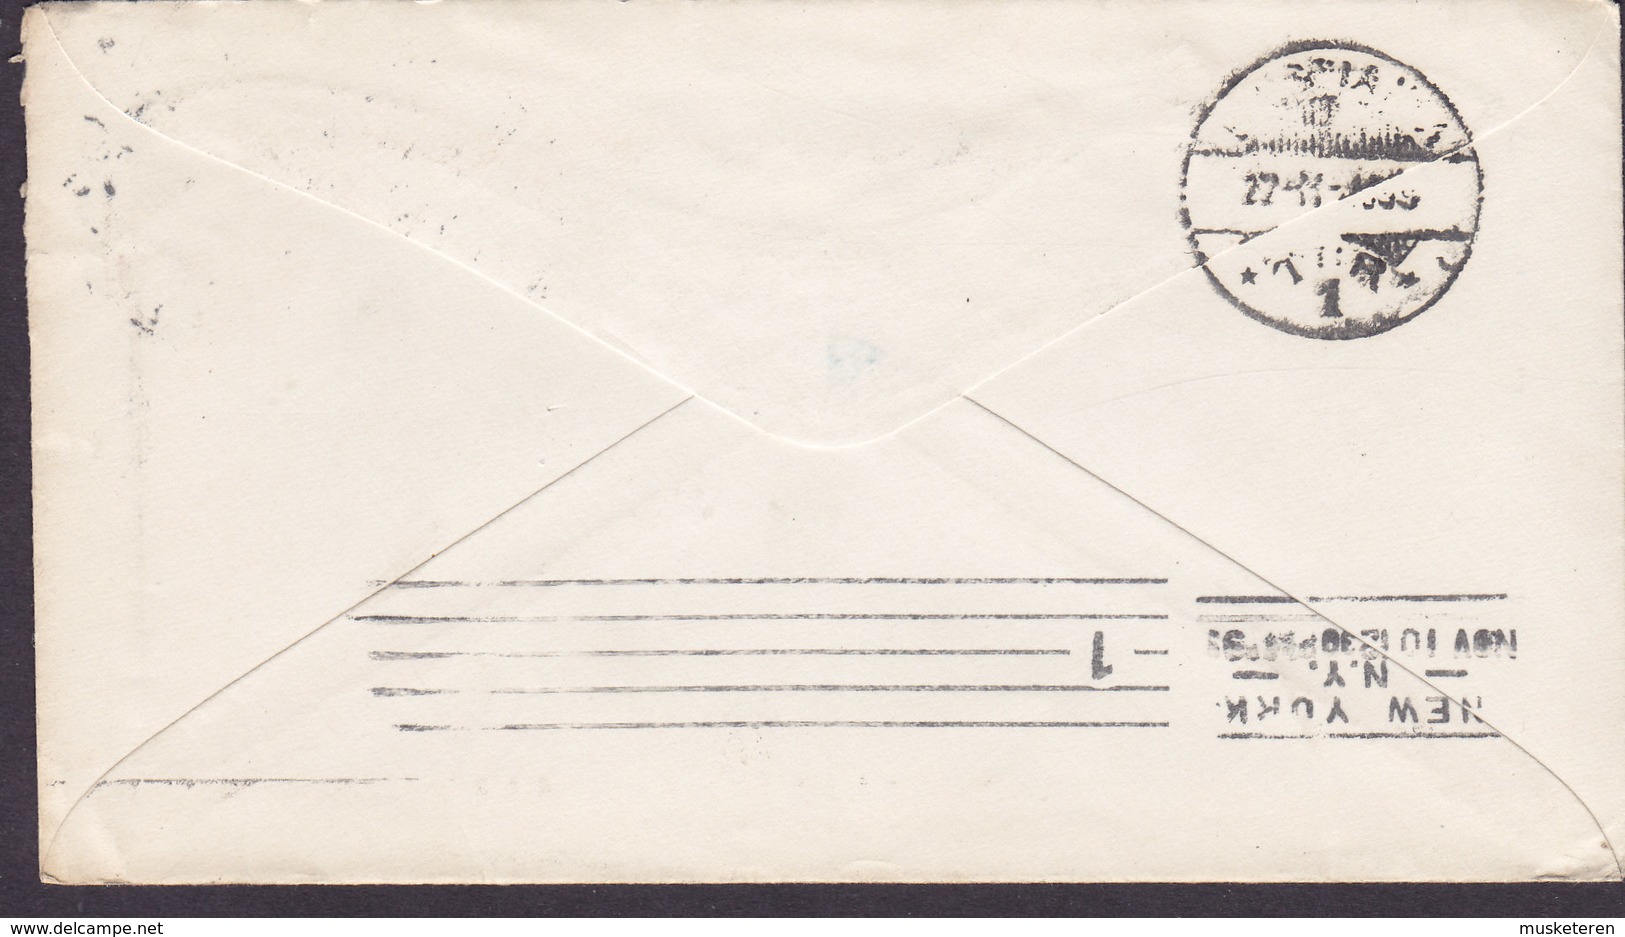 United States Postal Stationery Ganzsache PRIVATE Print L. CHRISTIAN & Co. MINNEAPOLIS 1899 CHRISTIANIA (Arr.) Norway - Covers & Documents